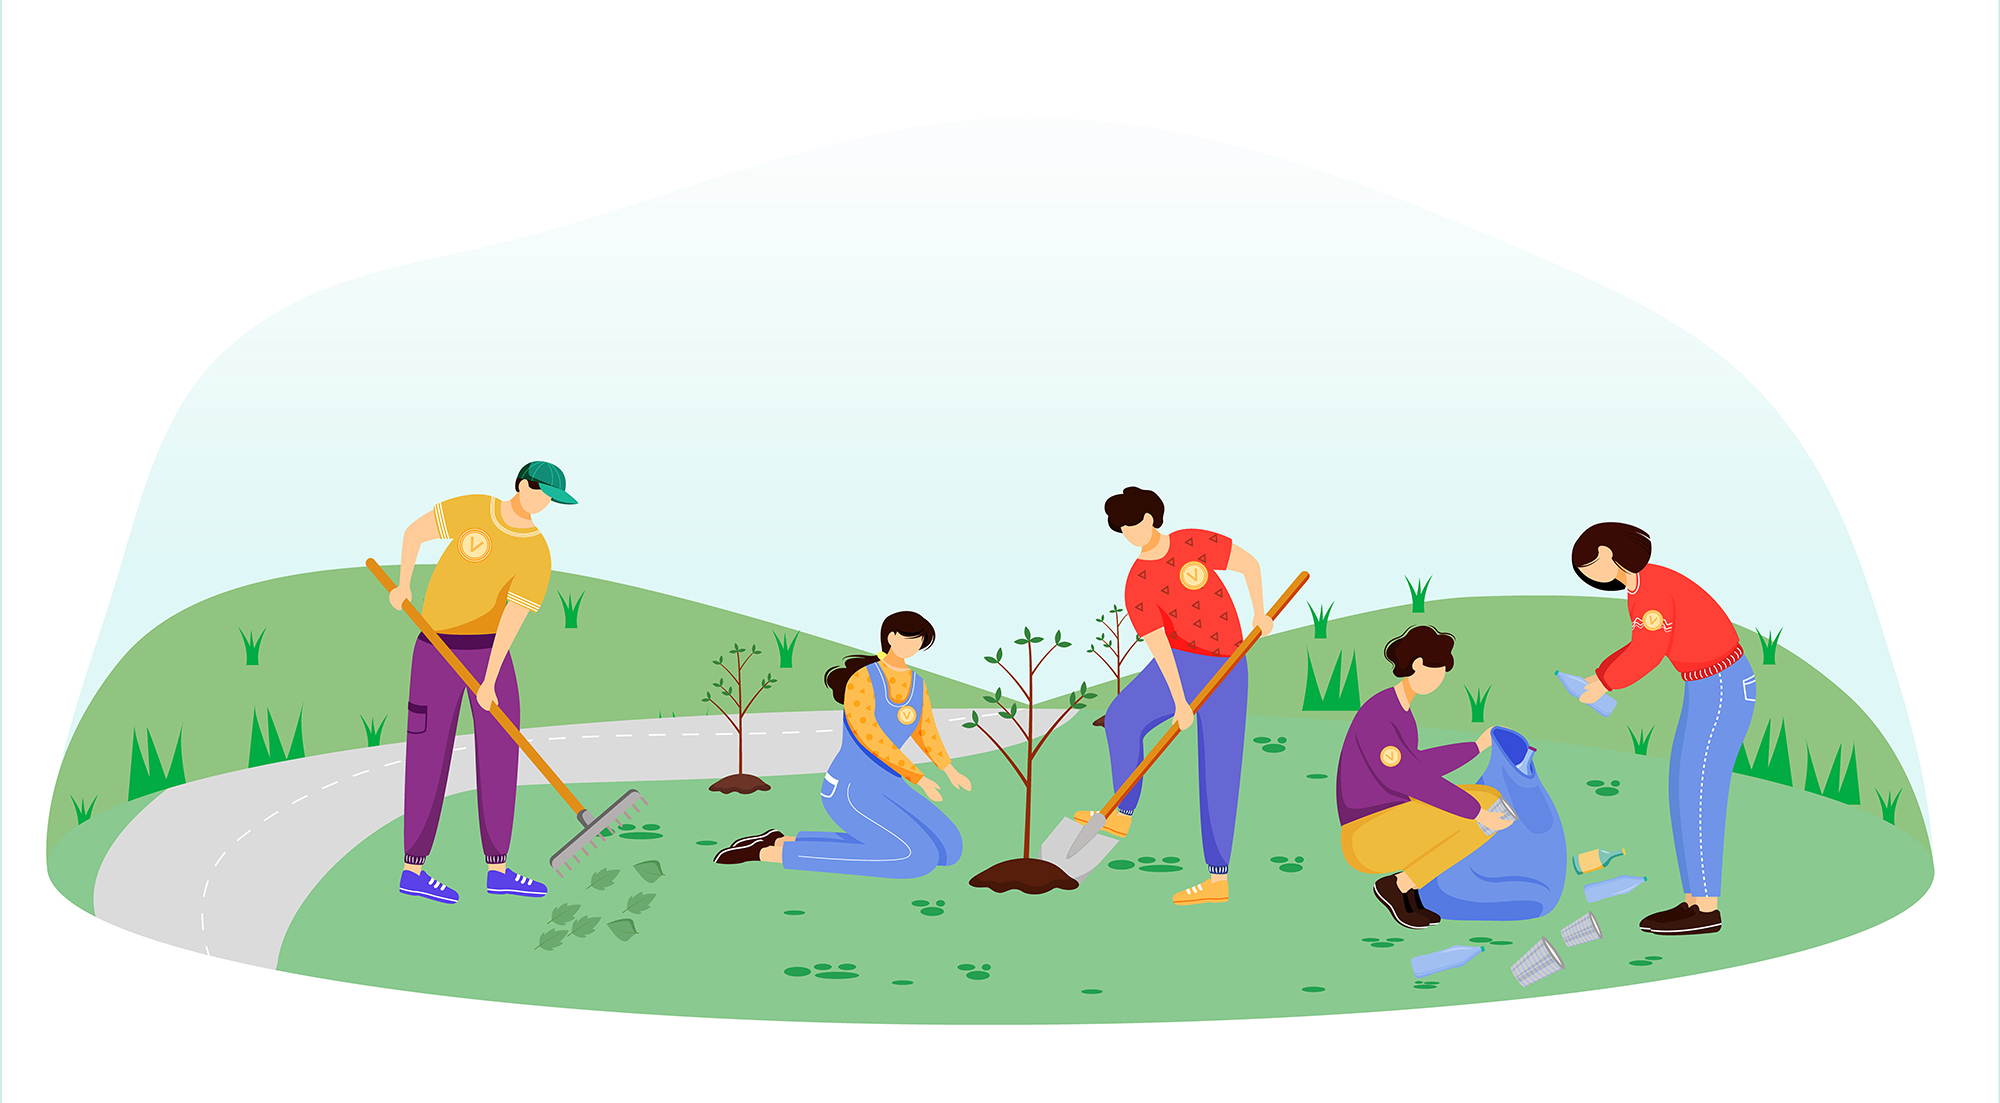 Community work day flat vector illustration. Volunteers, activists isolated cartoon characters on white background. Young people cleaning garbage and planting trees. Environment protection concept